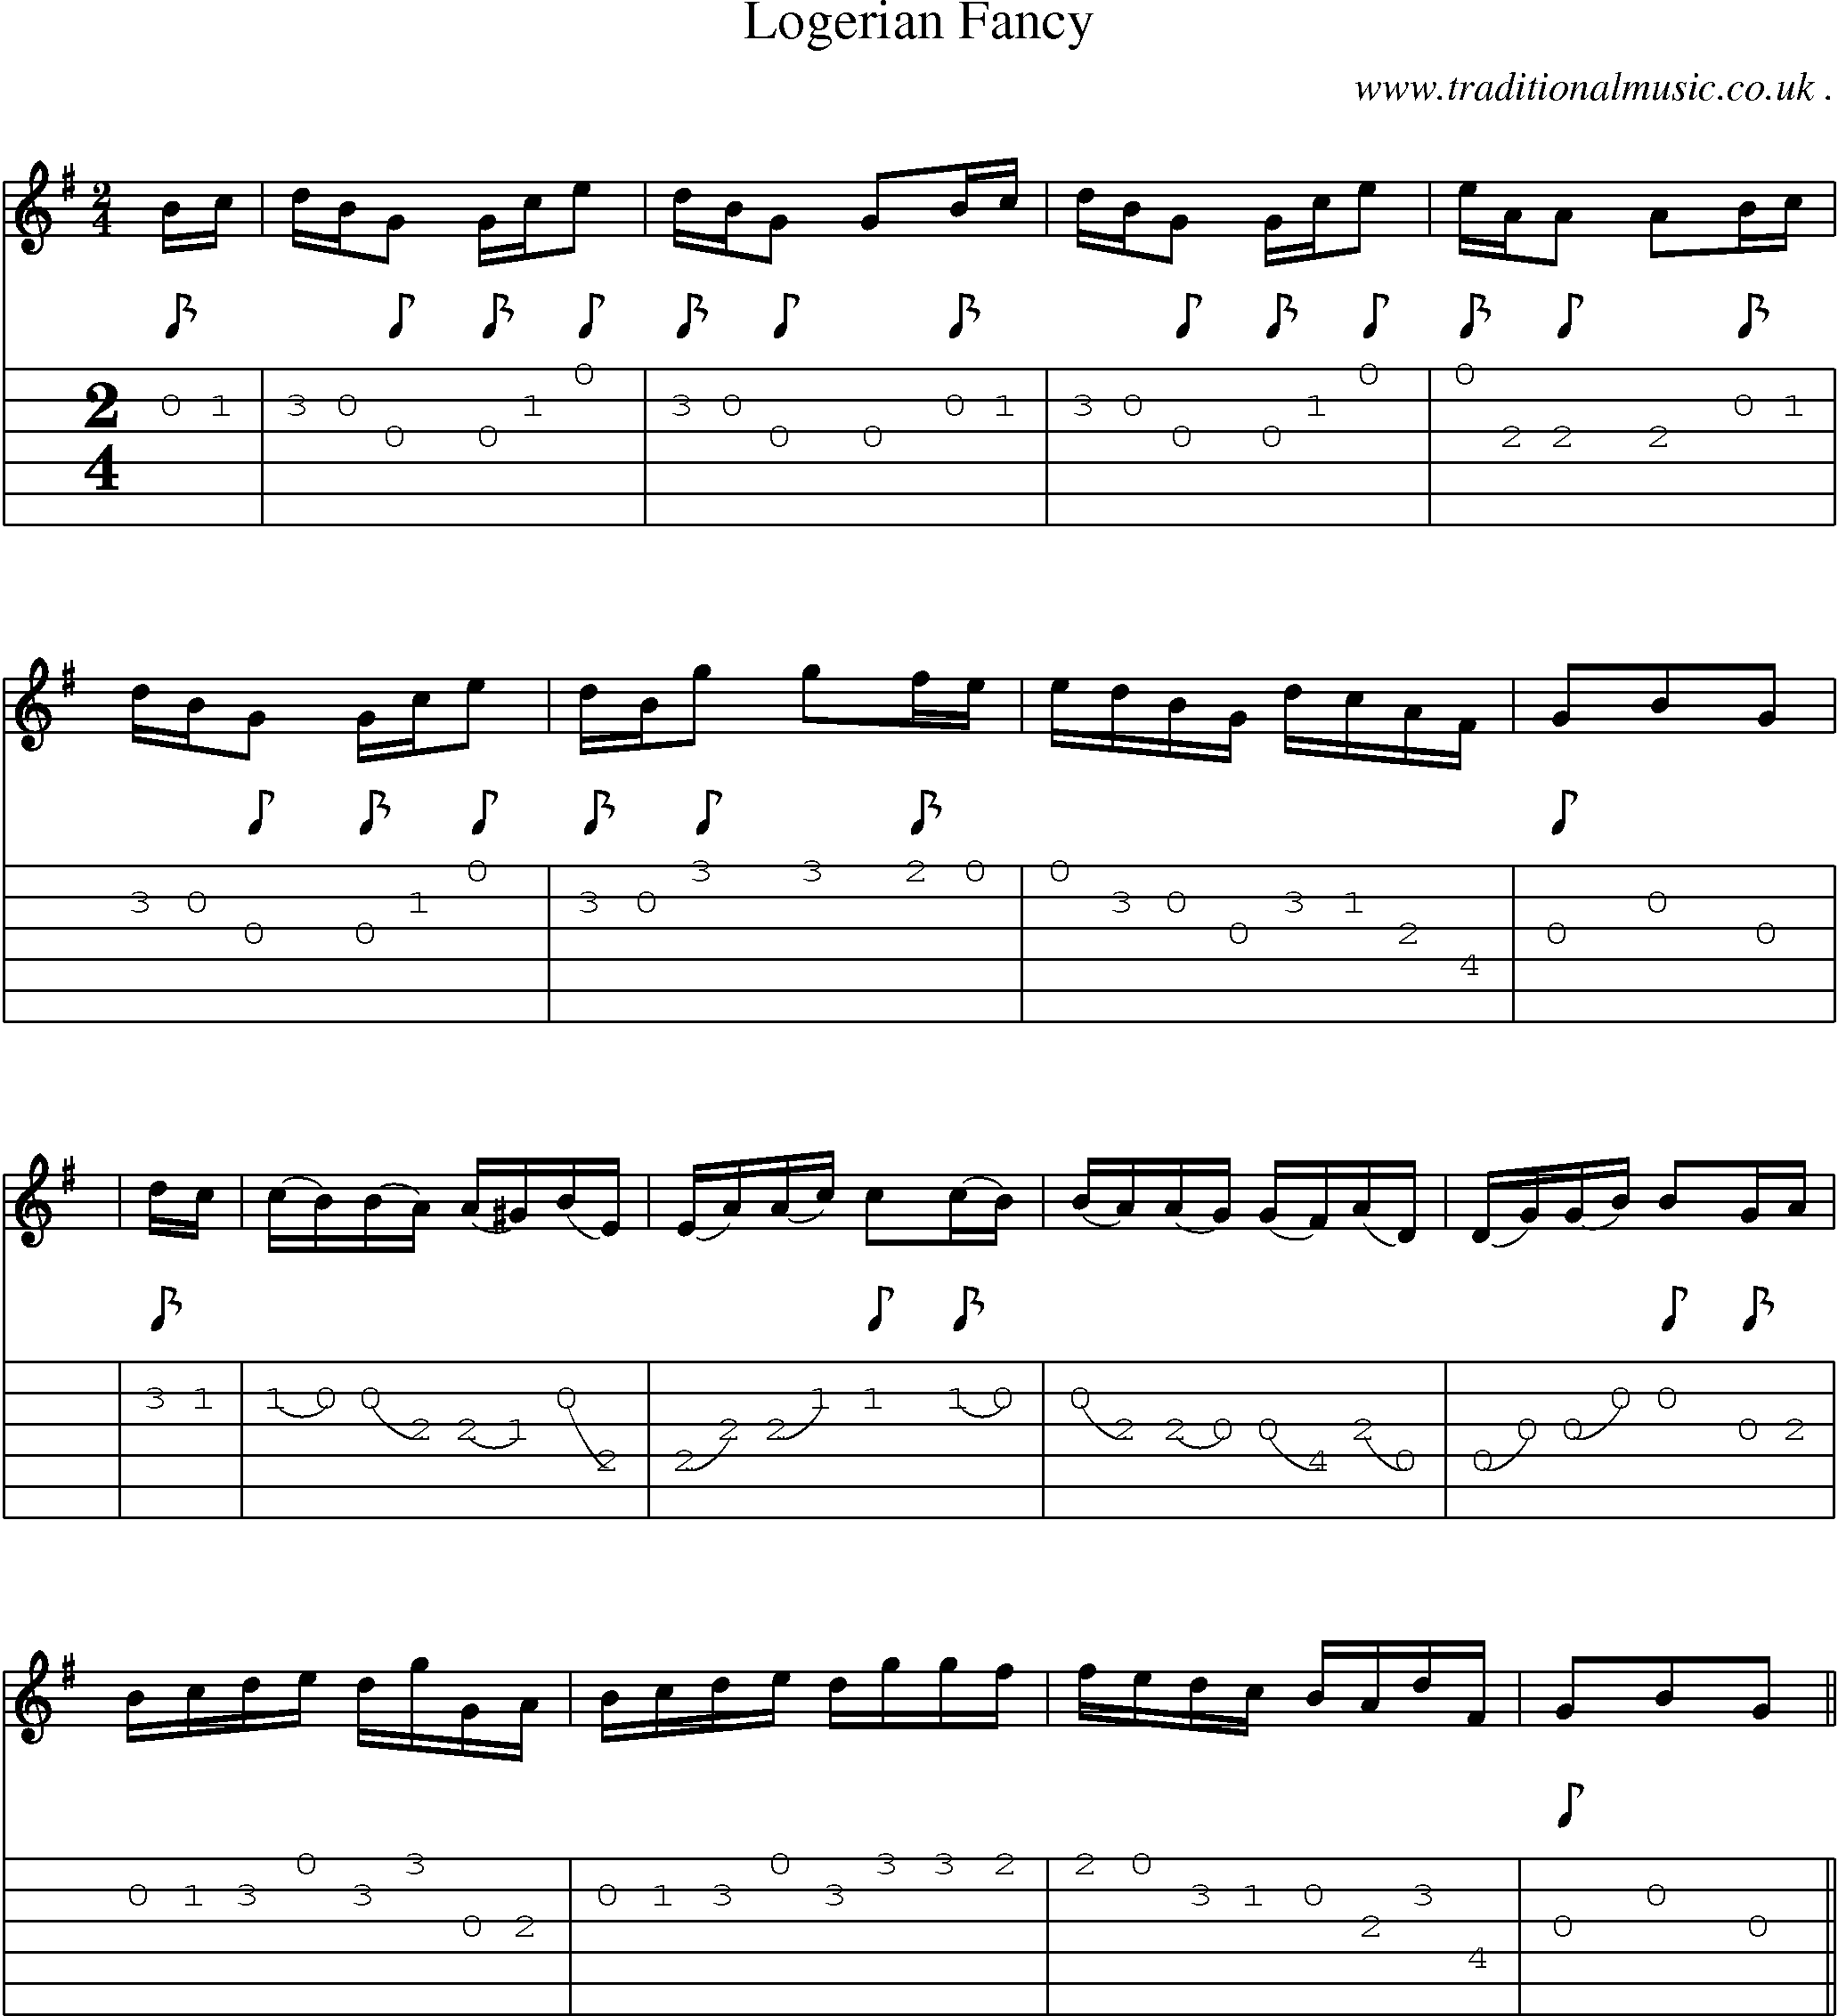 Sheet-Music and Guitar Tabs for Logerian Fancy